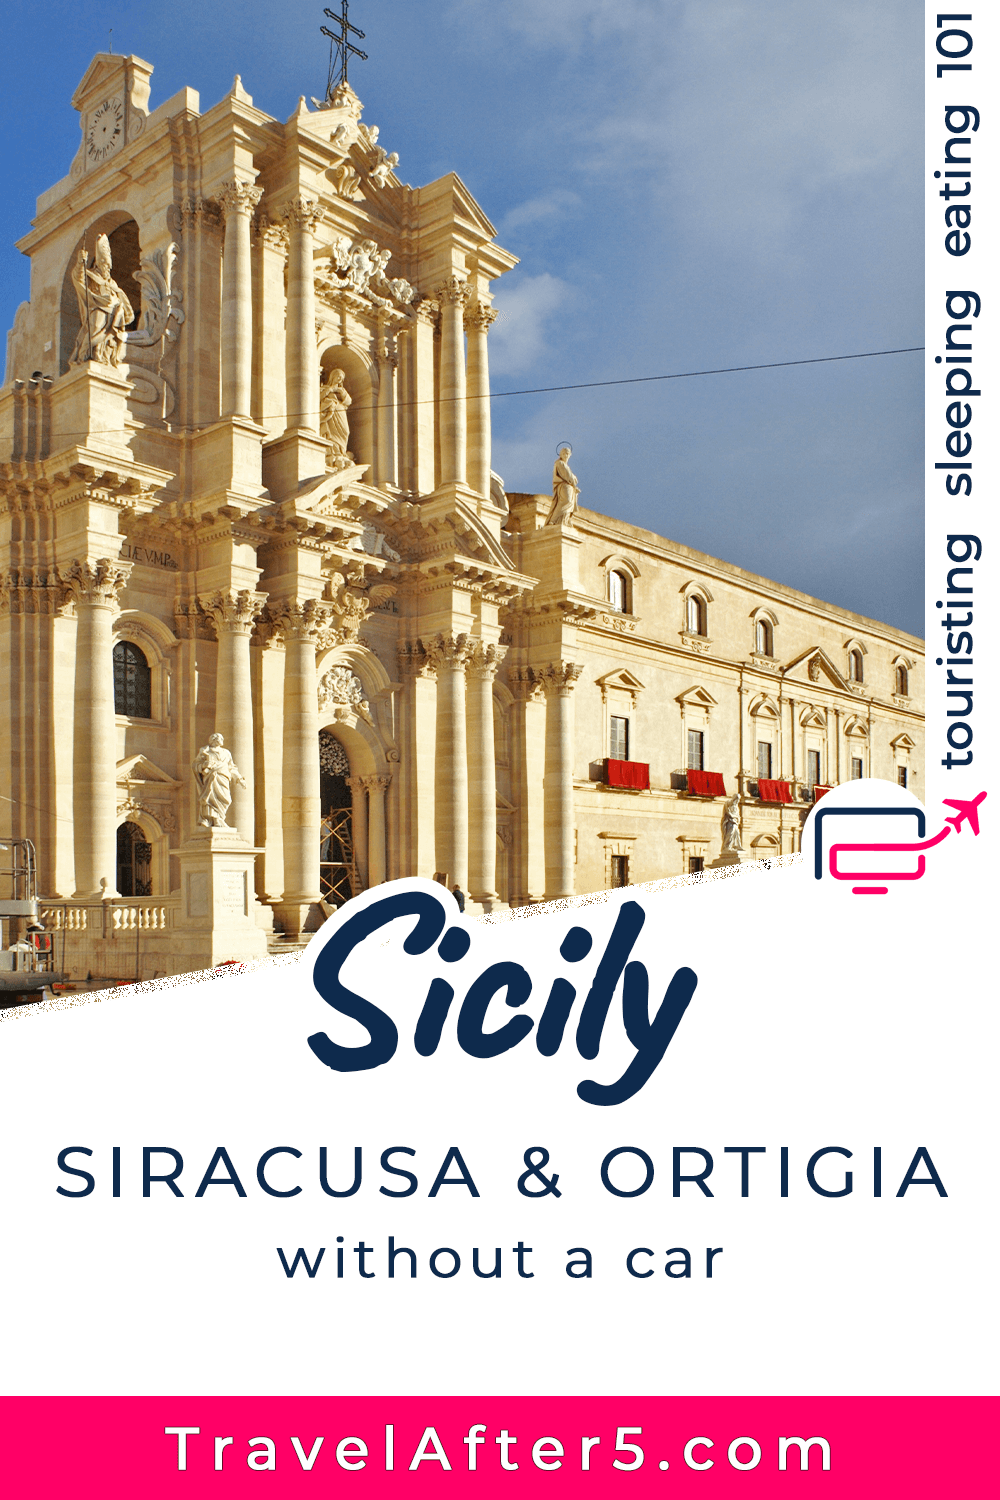 Pinterest Pin_Sicily: Syracuse & Ortygia Without a Car, by Travel After 5